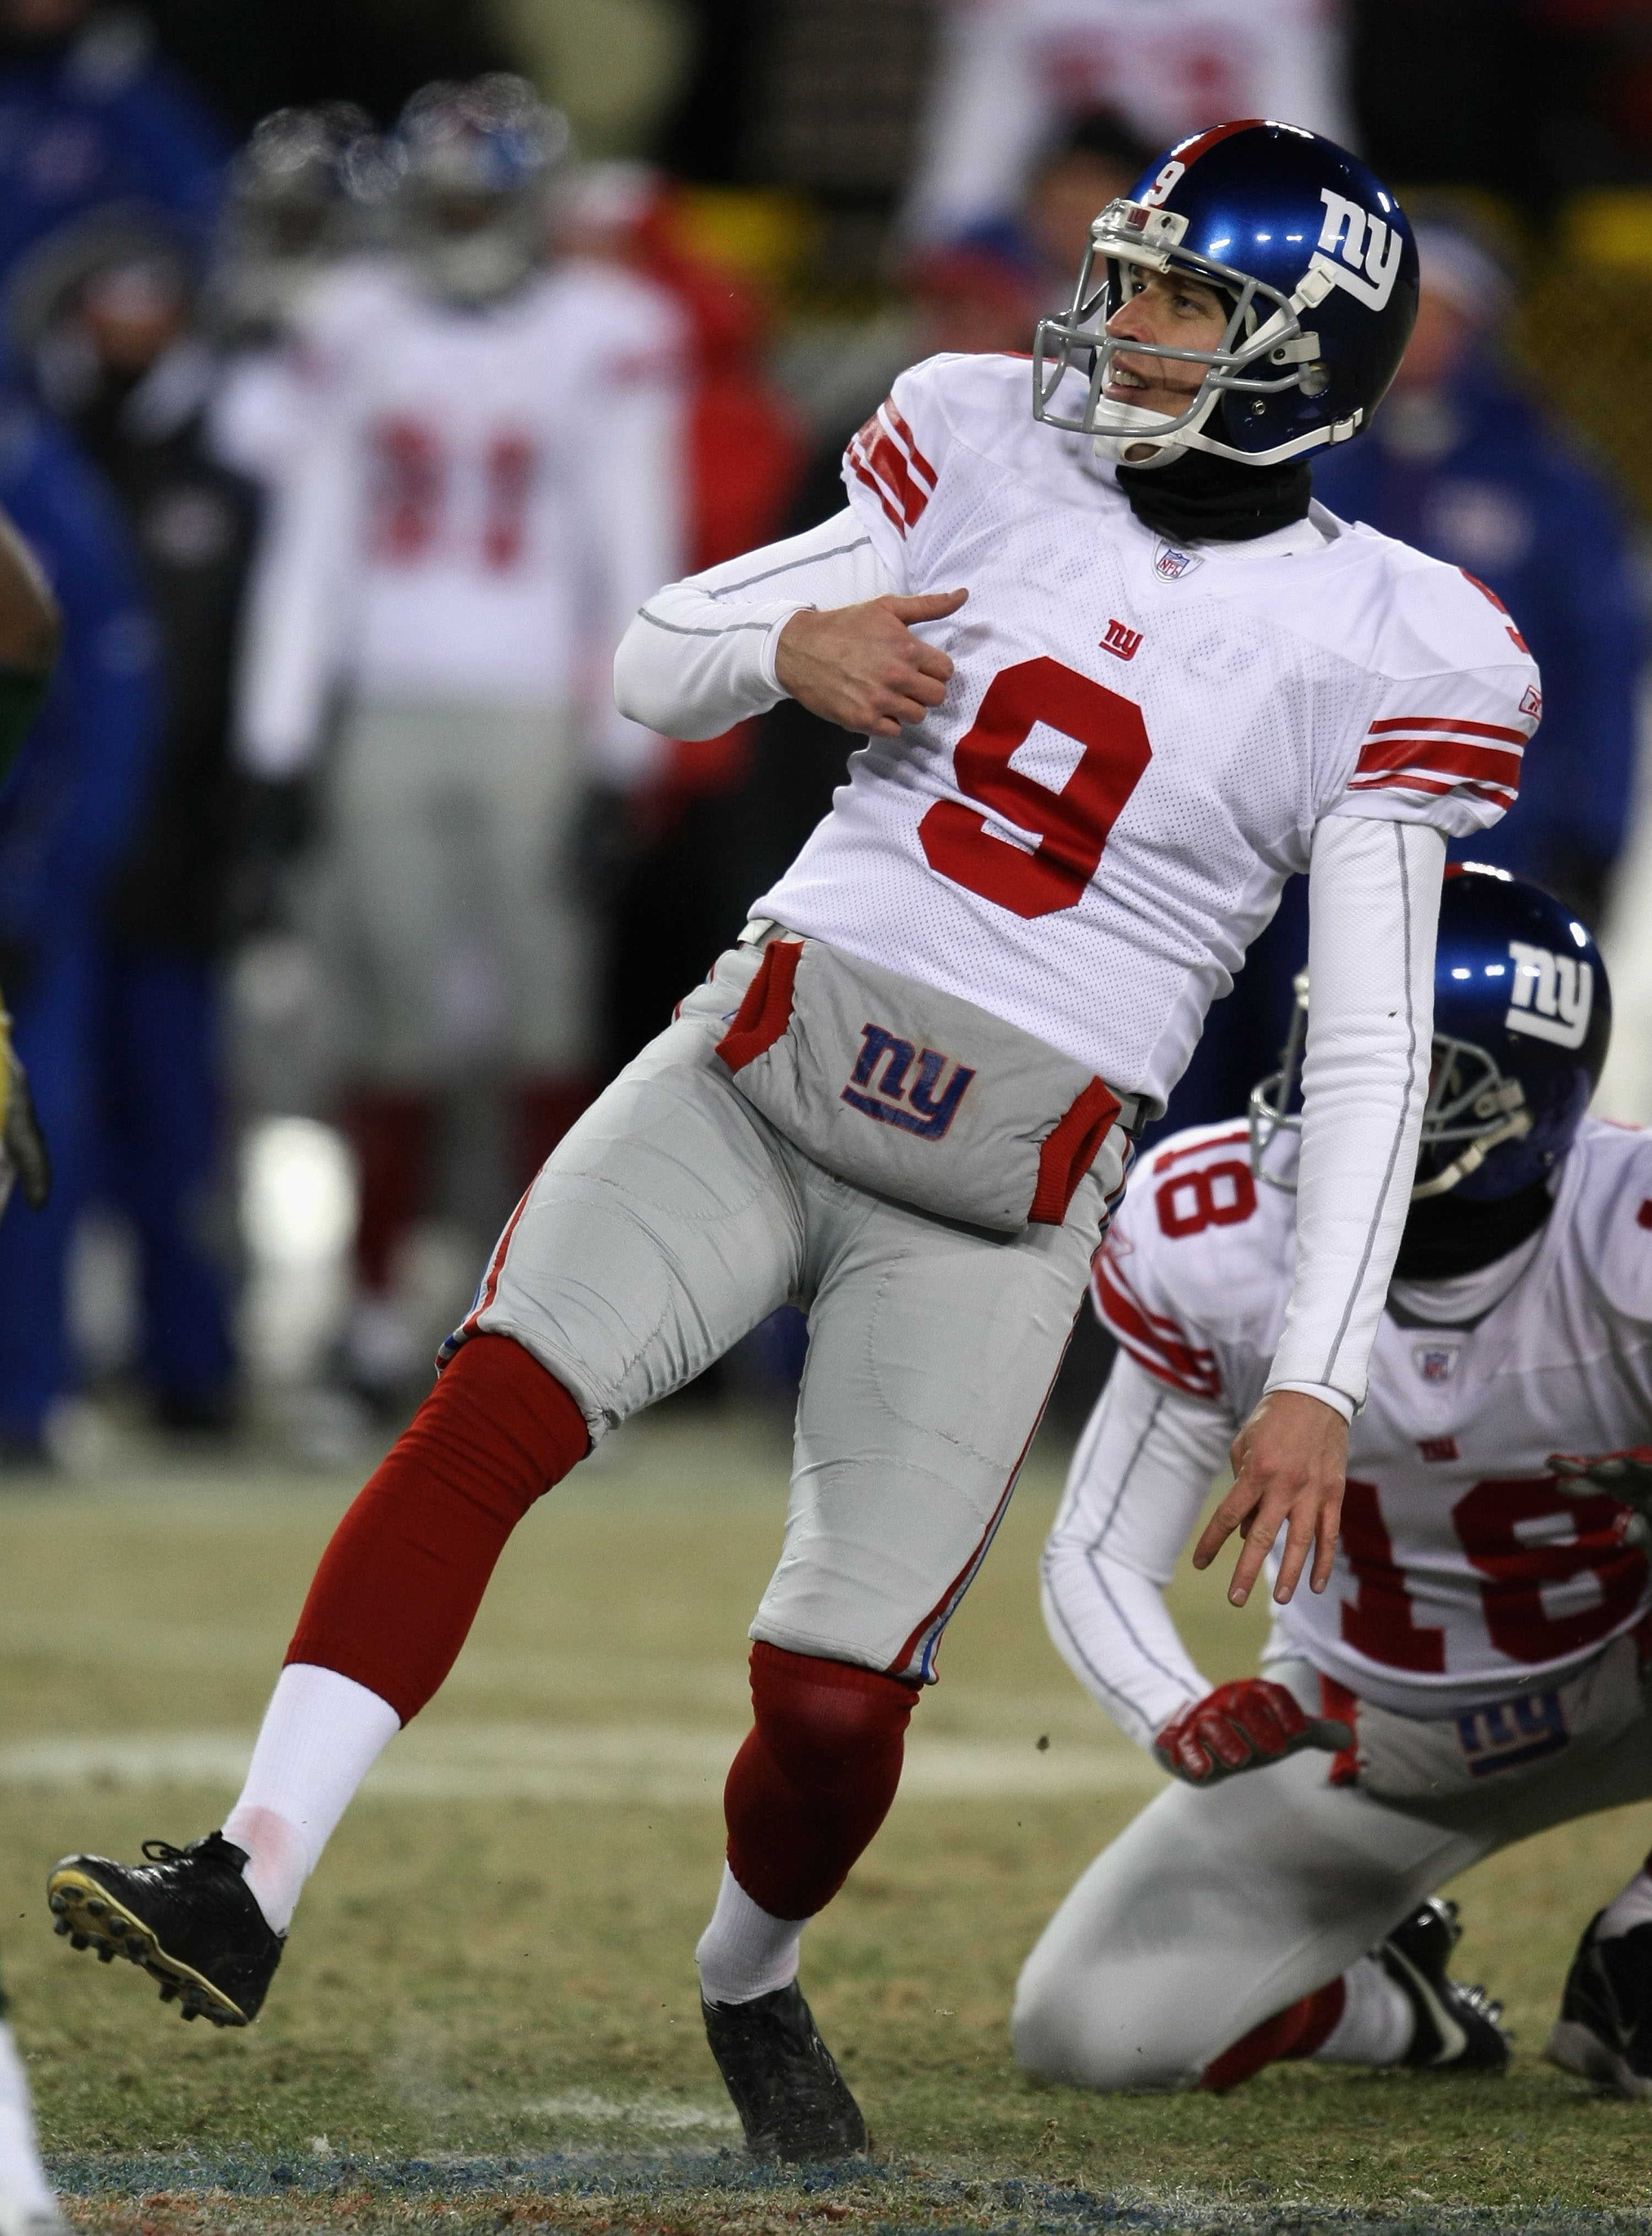 GREEN BAY, WI - JANUARY 20:  Kicker Lawrence Tynes #9 of the New York Giants watches his 18 yard feild goal miss at the end of the fourth quarter during the NFC championship game against the Green Bay Packers on January 20, 2008 at Lambeau Field in Green